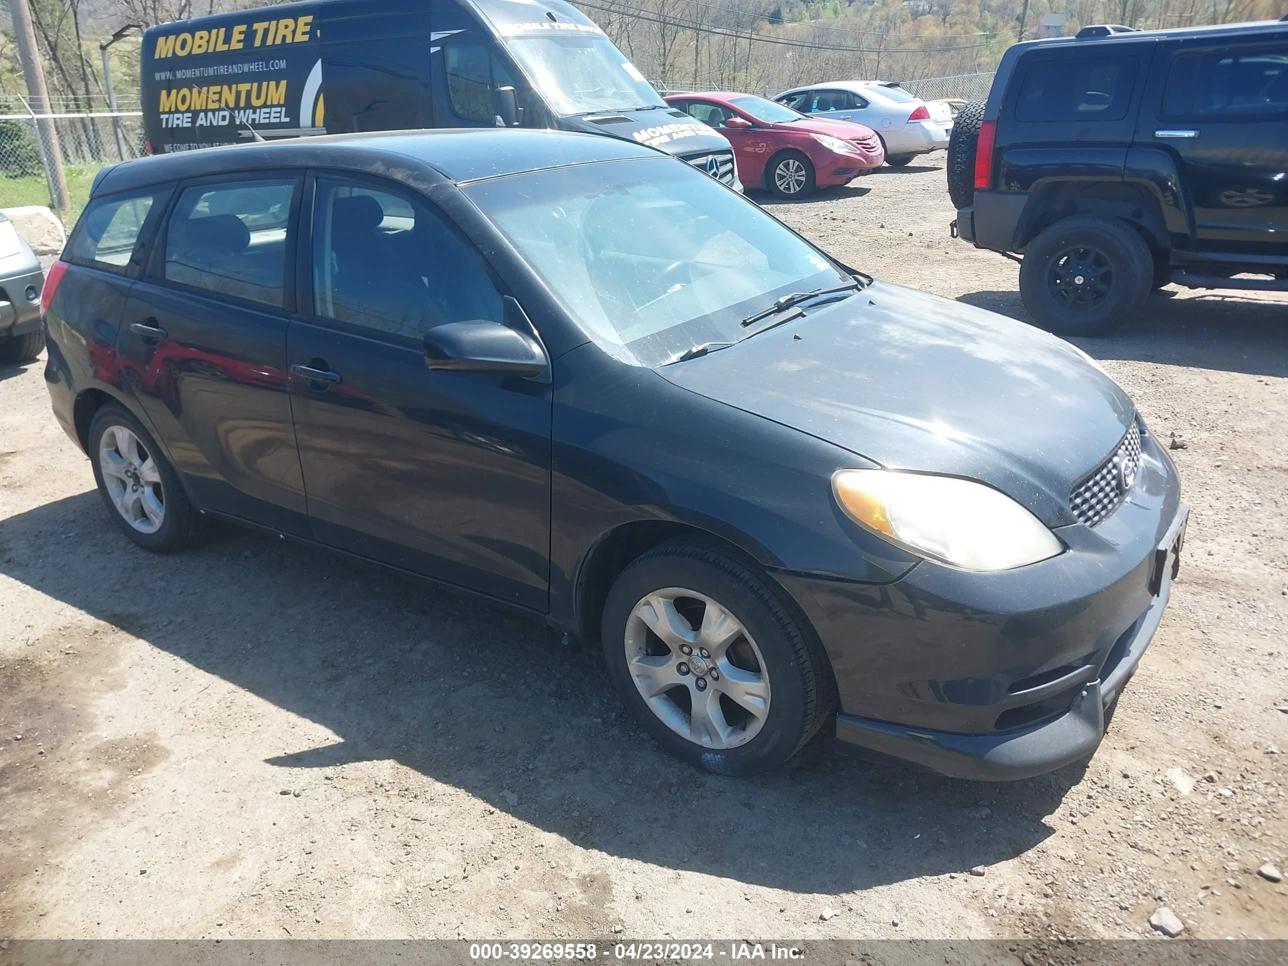 vin: 2T1KR32E84C253426 2T1KR32E84C253426 2004 toyota matrix 1800 for Sale in 07865, 985 State Route 57, Port Murray, New Jersey, USA